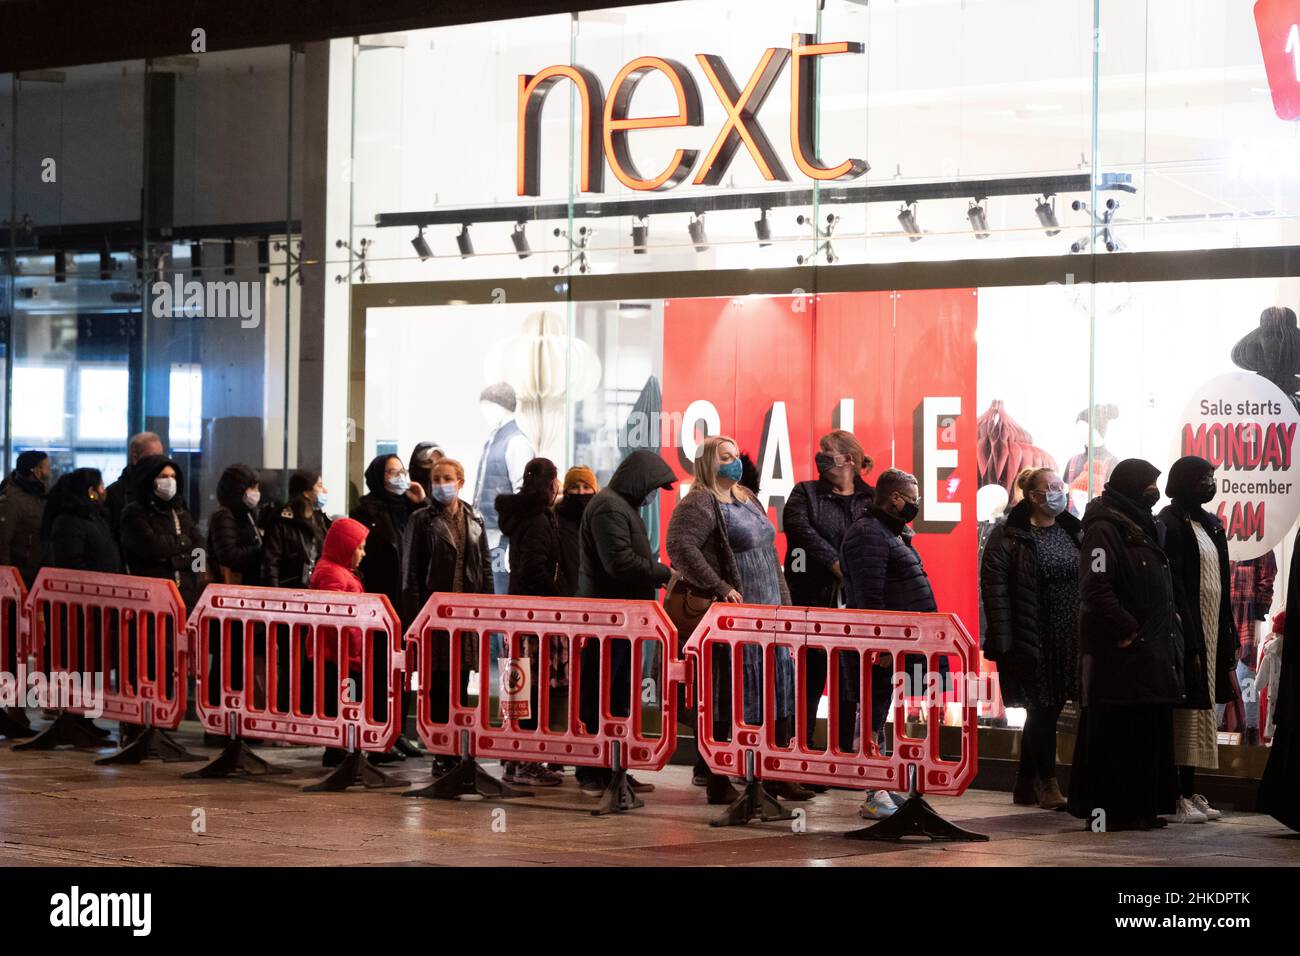 People queue outside a Next store on Queen Street in Cardiff, Wales, United Kingdom for the Boxing Day sales. Stock Photo